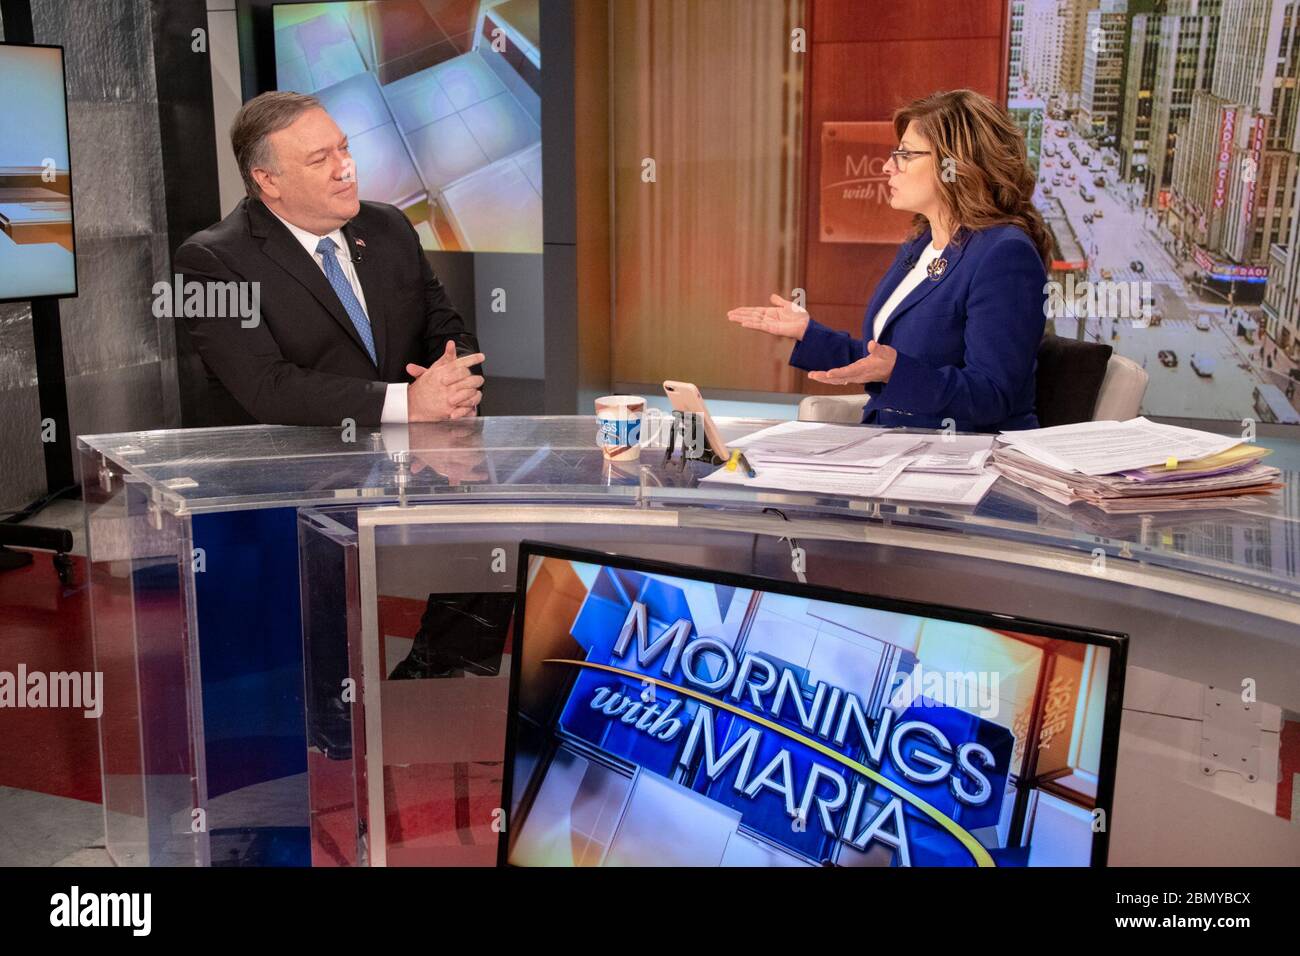 Secretary Pompeo participates in Media interview in NYC U.S. Secretary of State Michael R. Pompeo participates in a media interview with Maria Bartiromo in New York City, New York on April 5, 2019. Stock Photo